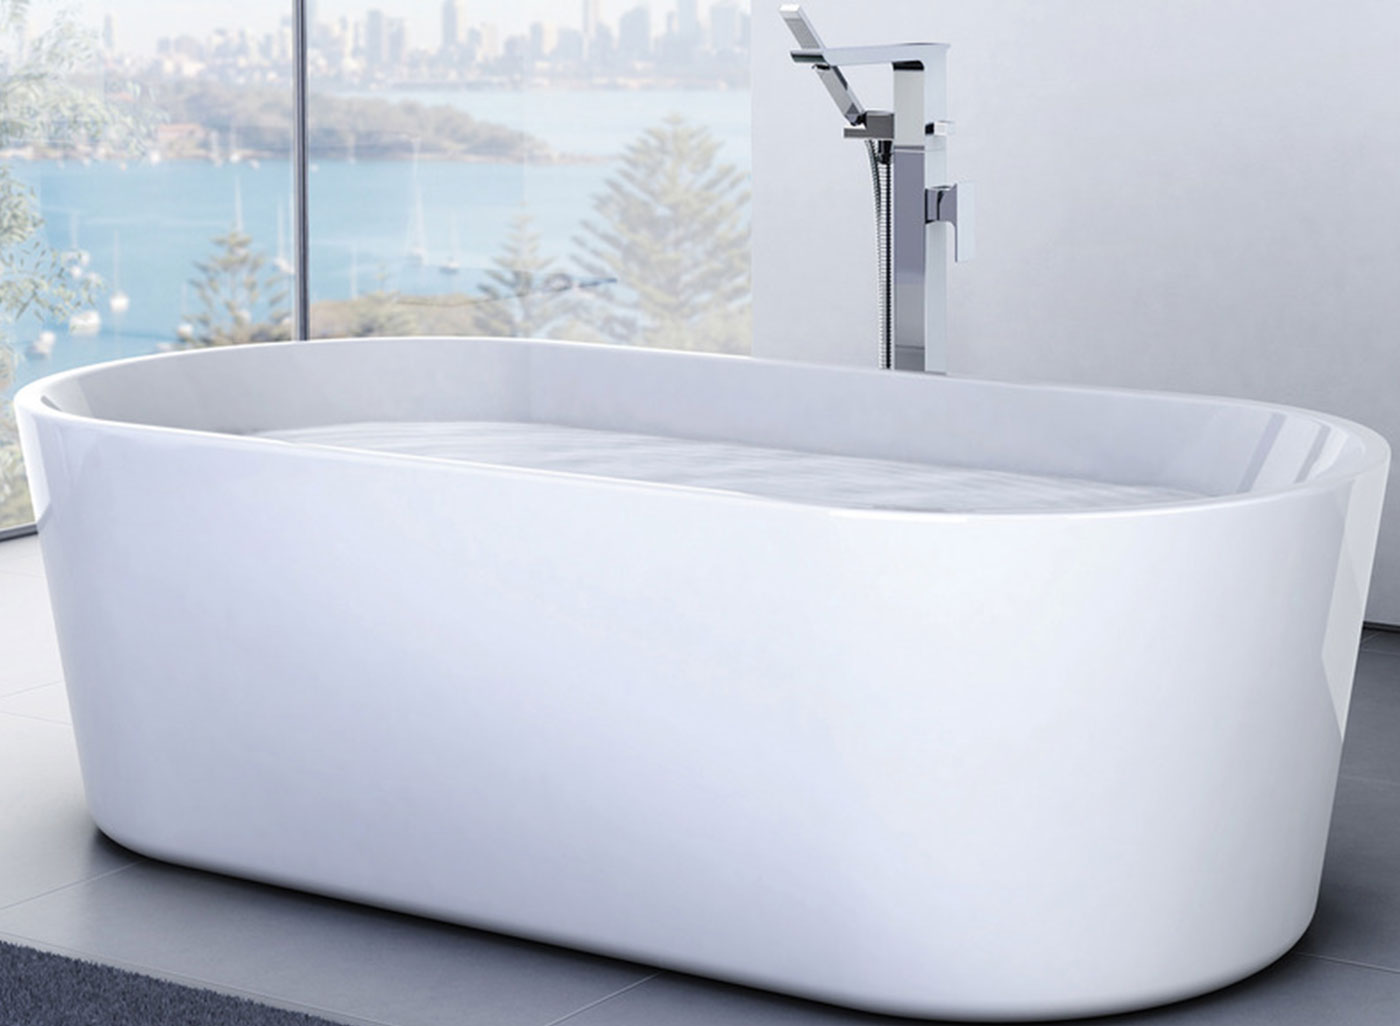 complete with an offset waste for a comfortable bathing experience. Available in two sizes